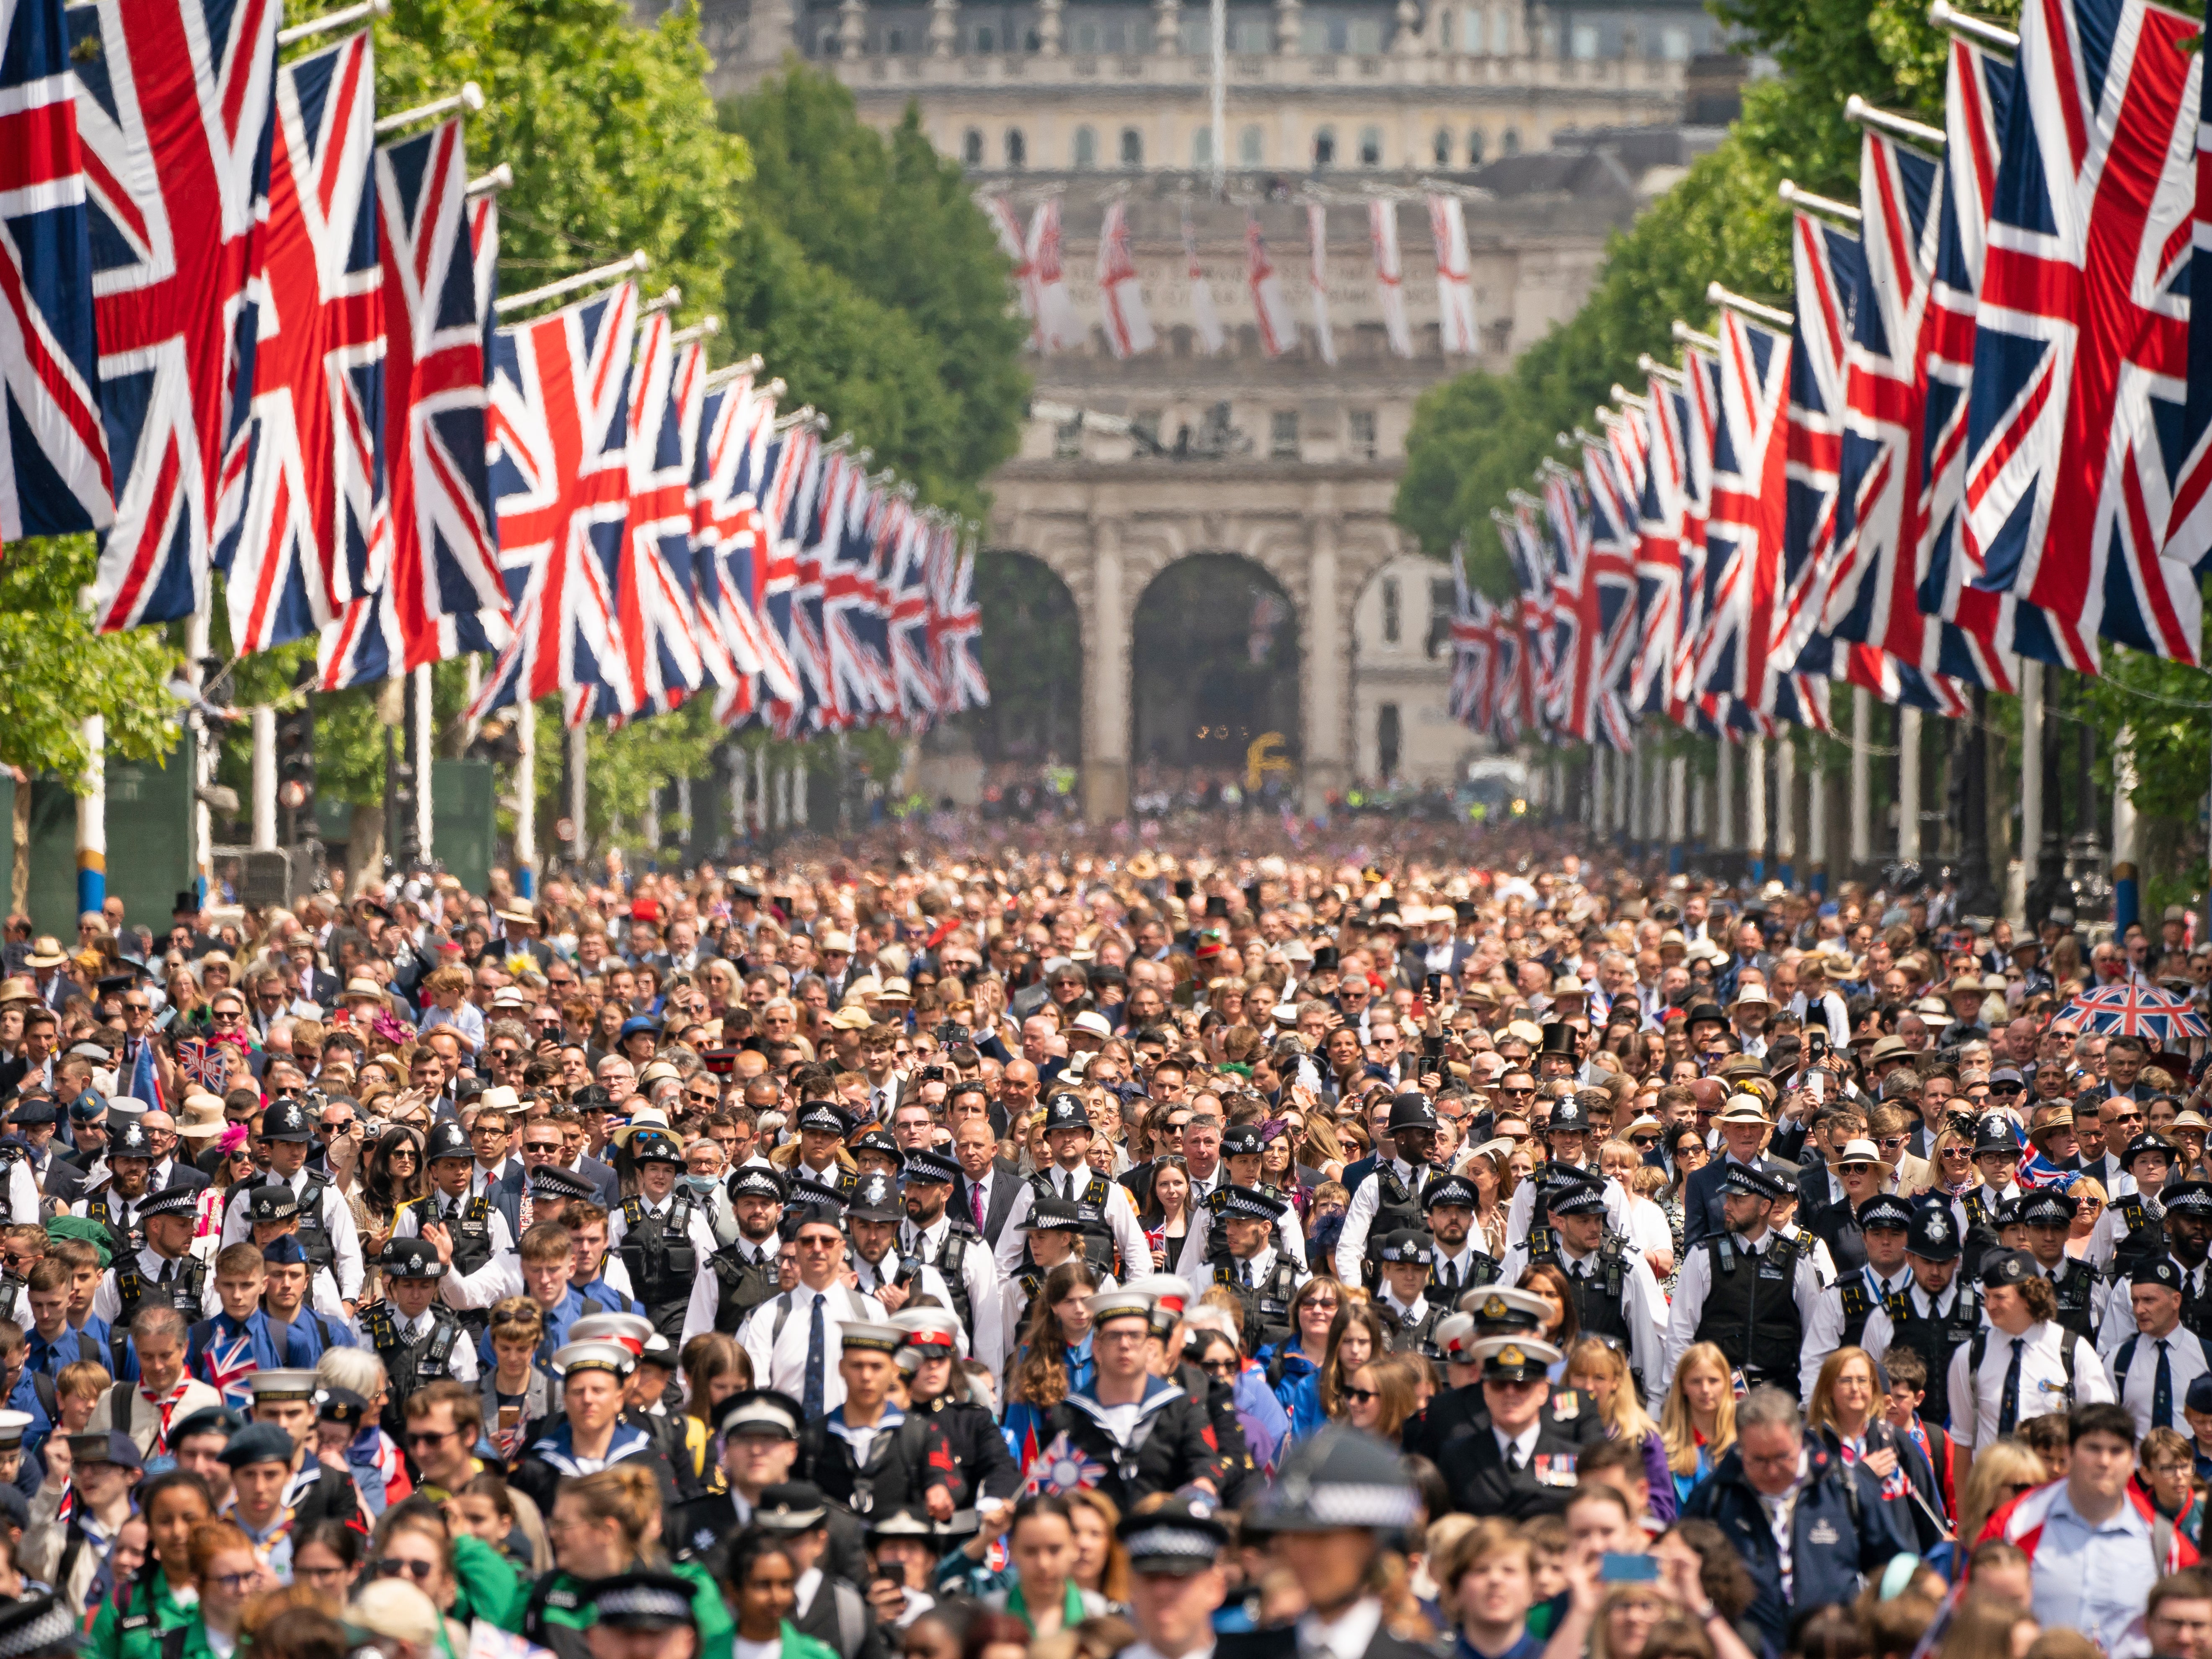 Crowds on The Mall on 2 June